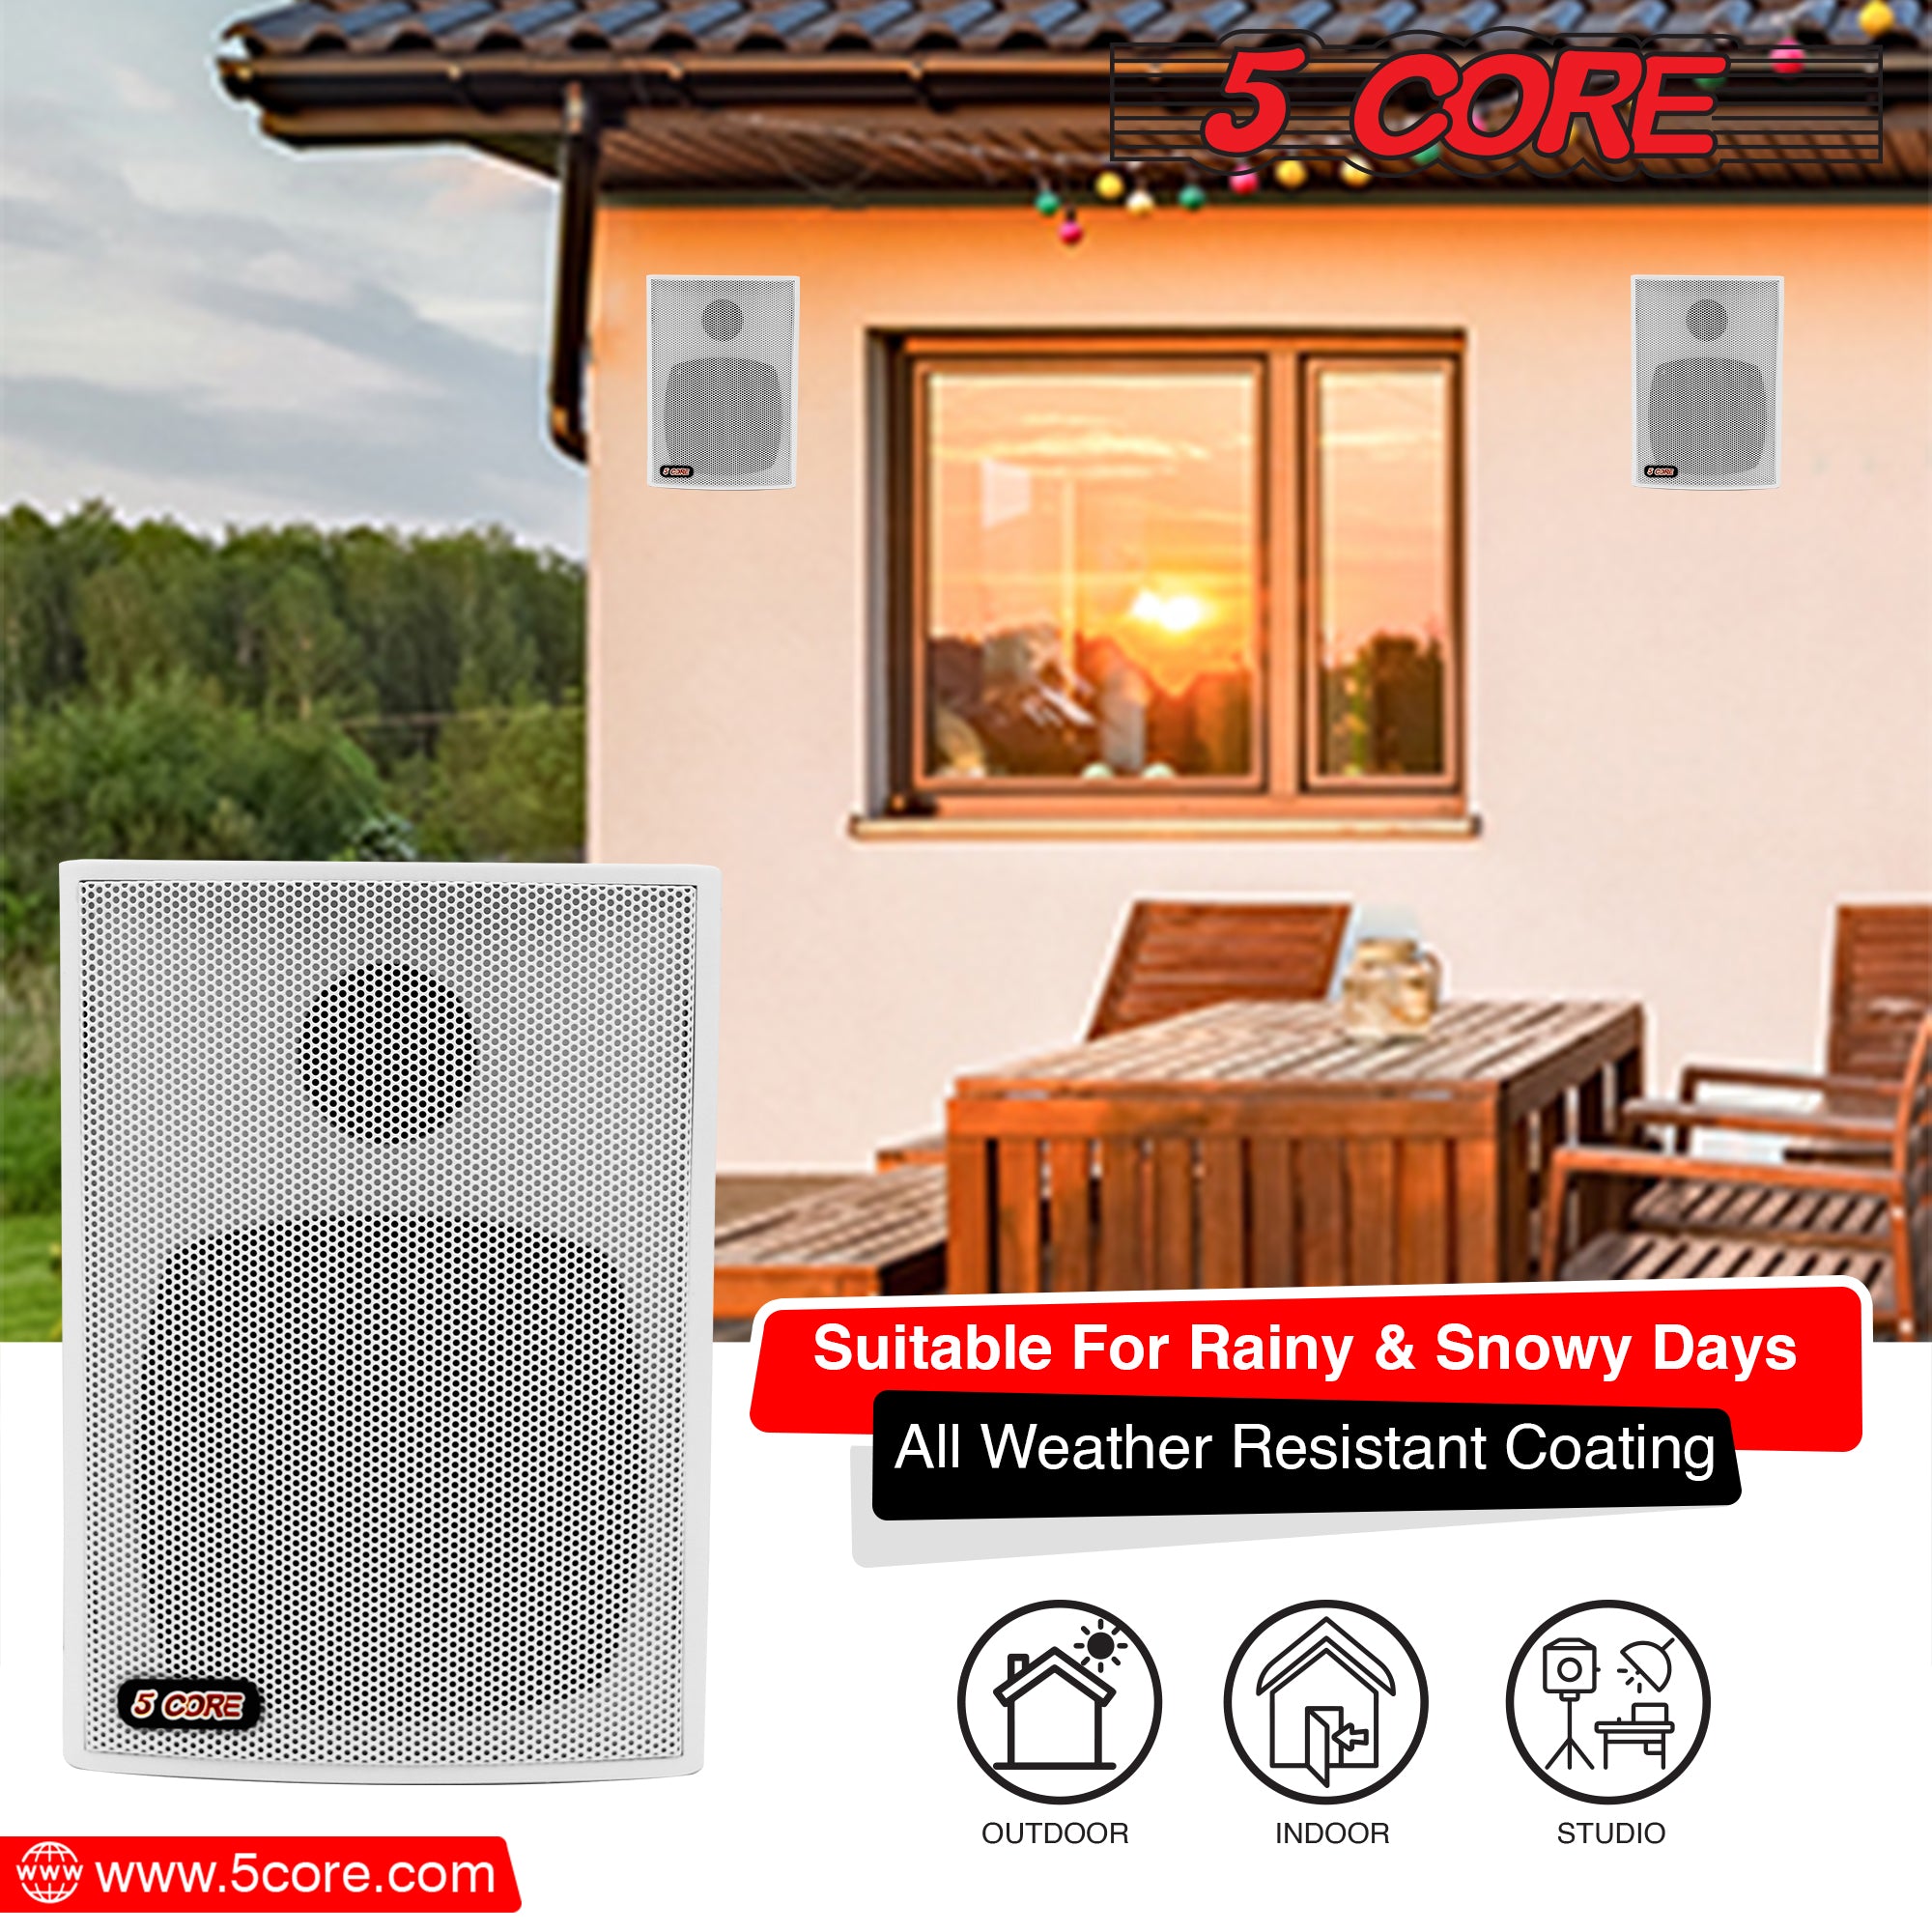 5 Core Wall Mount Speakers Outdoor 20W 1 Piece Stereo Wired Speaker White For Studio Patio Pool Home Office Commercial Places - 13T WH 1PK